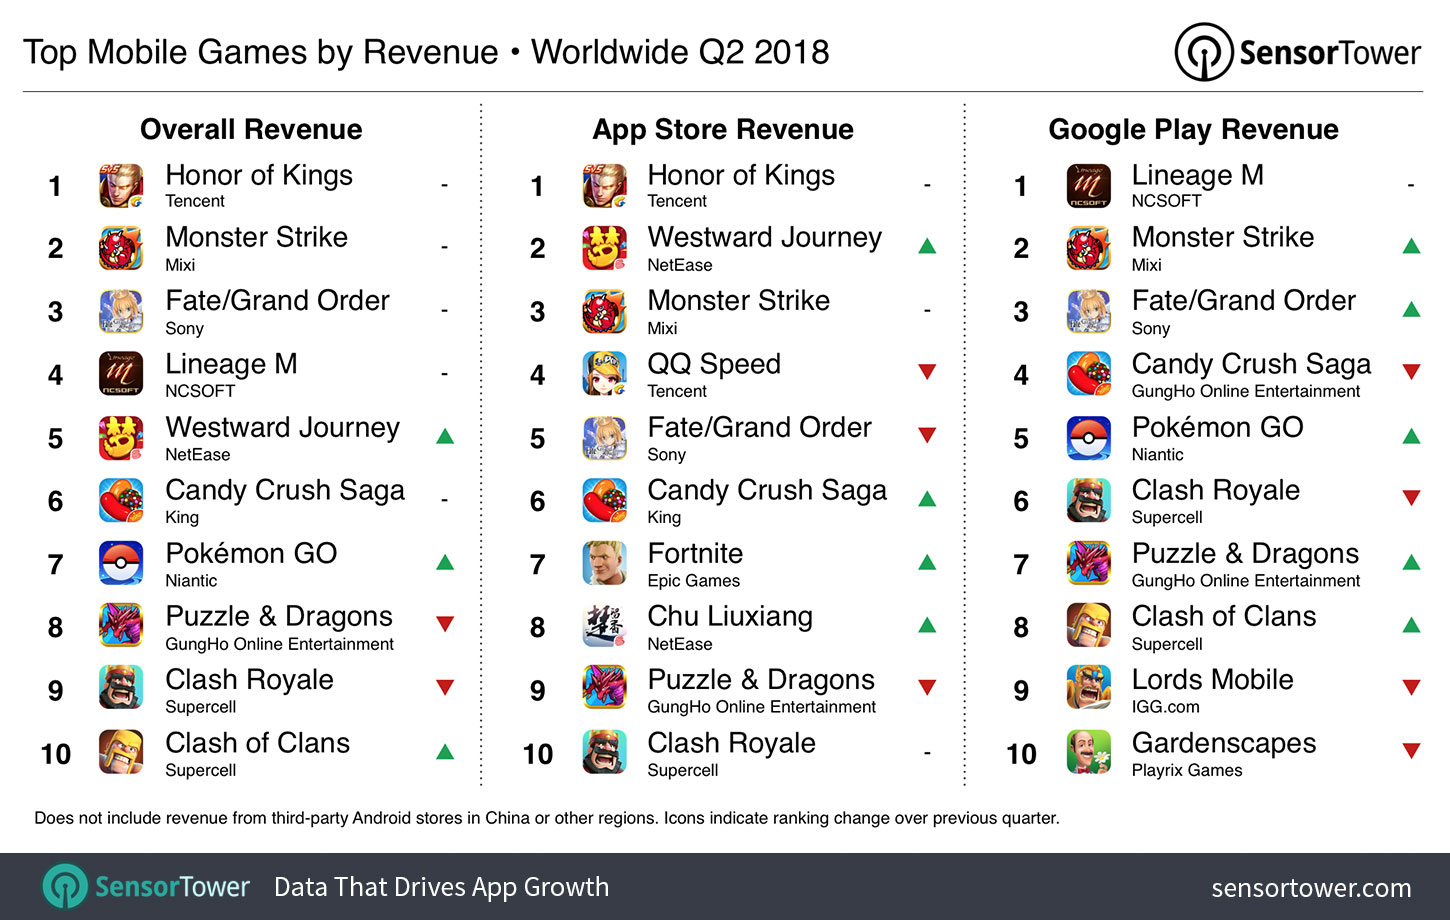 Chart showing the world's highest grossing iOS and Google Play games for Q2 2018